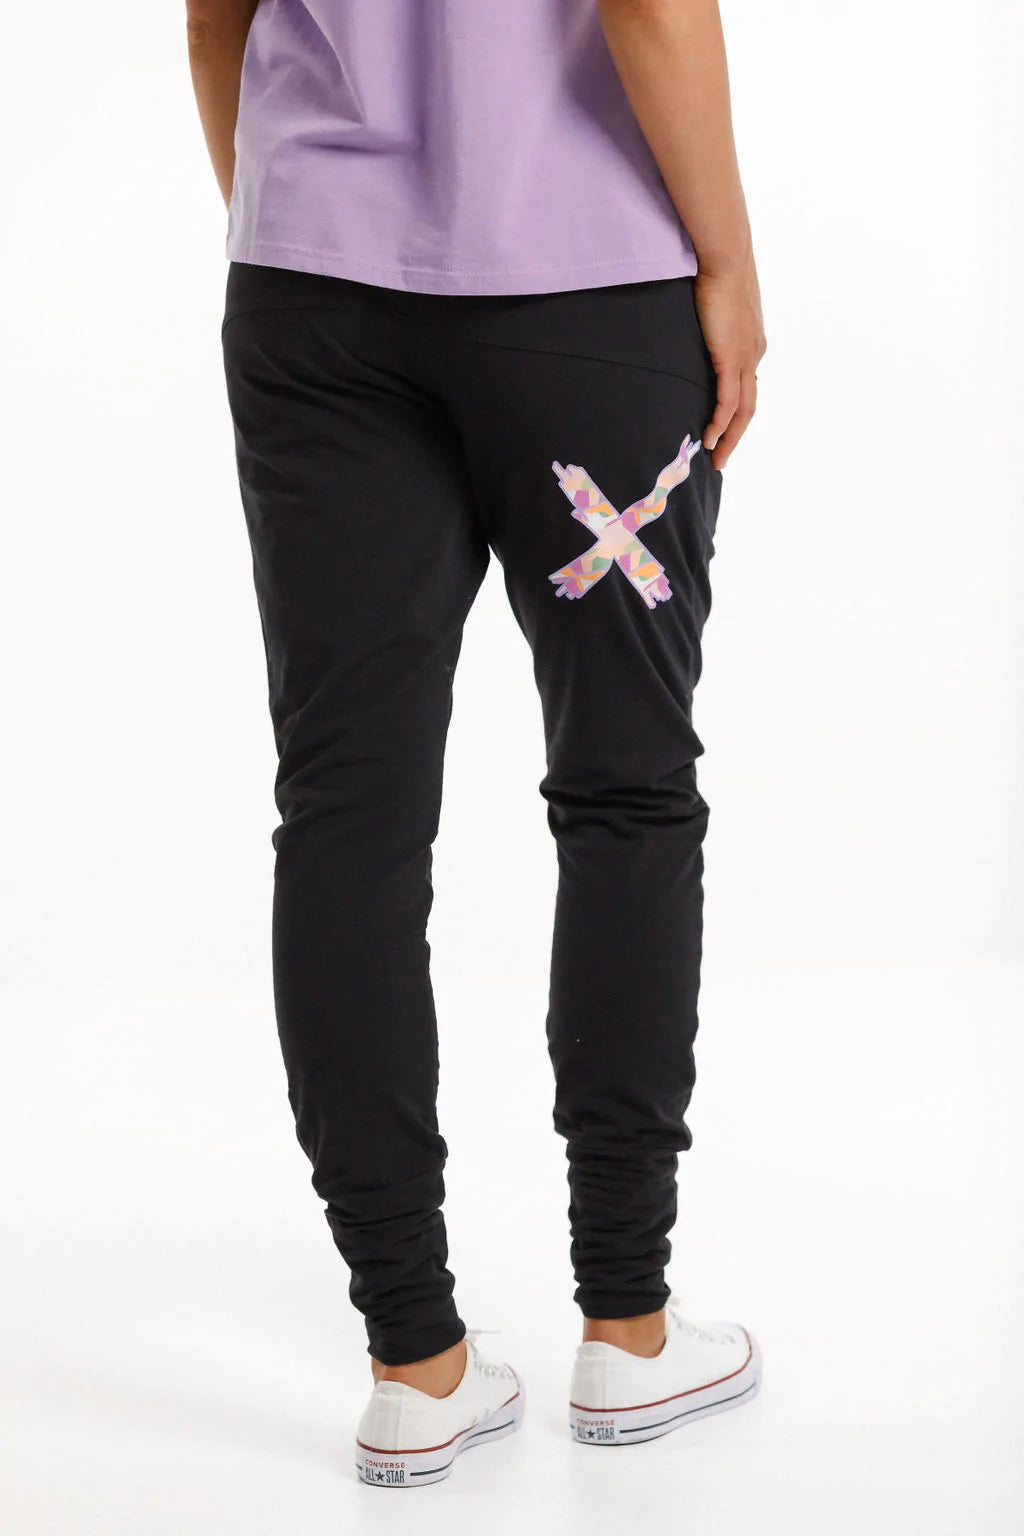 Apartment Pant Black with Summer Camo Patterned Cross - HOME LEE Pant NZ LUMA